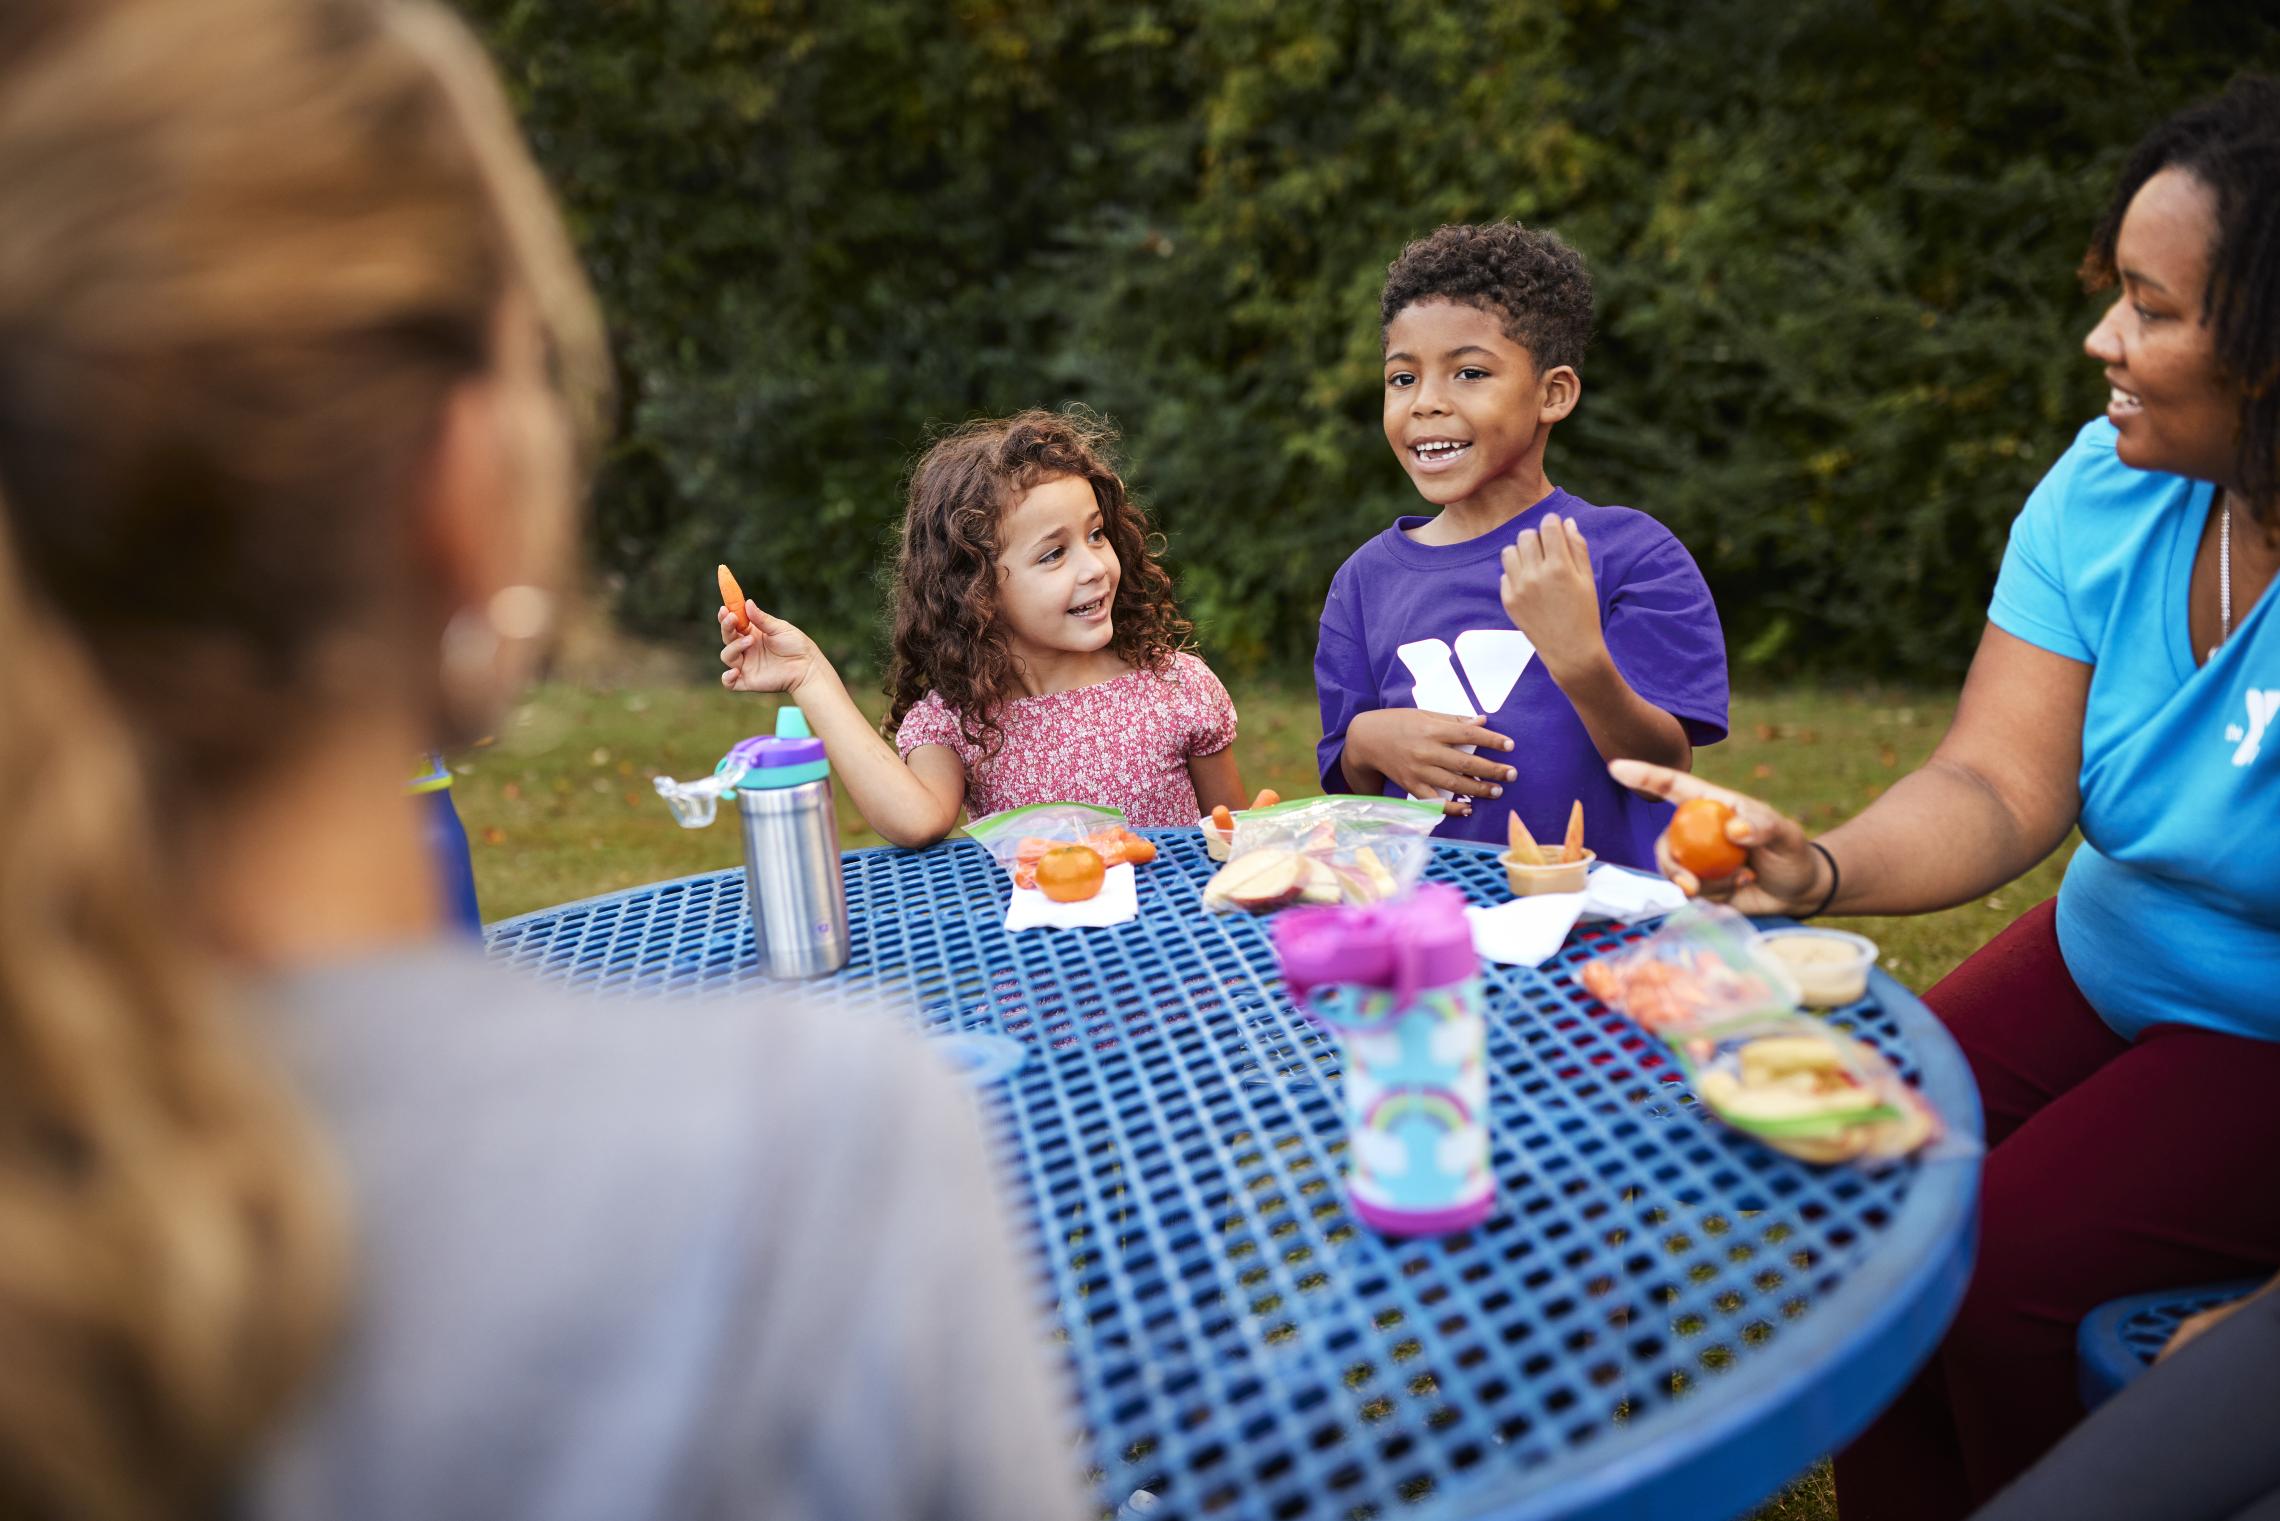 Campers enjoy snack time outside at the YMCA